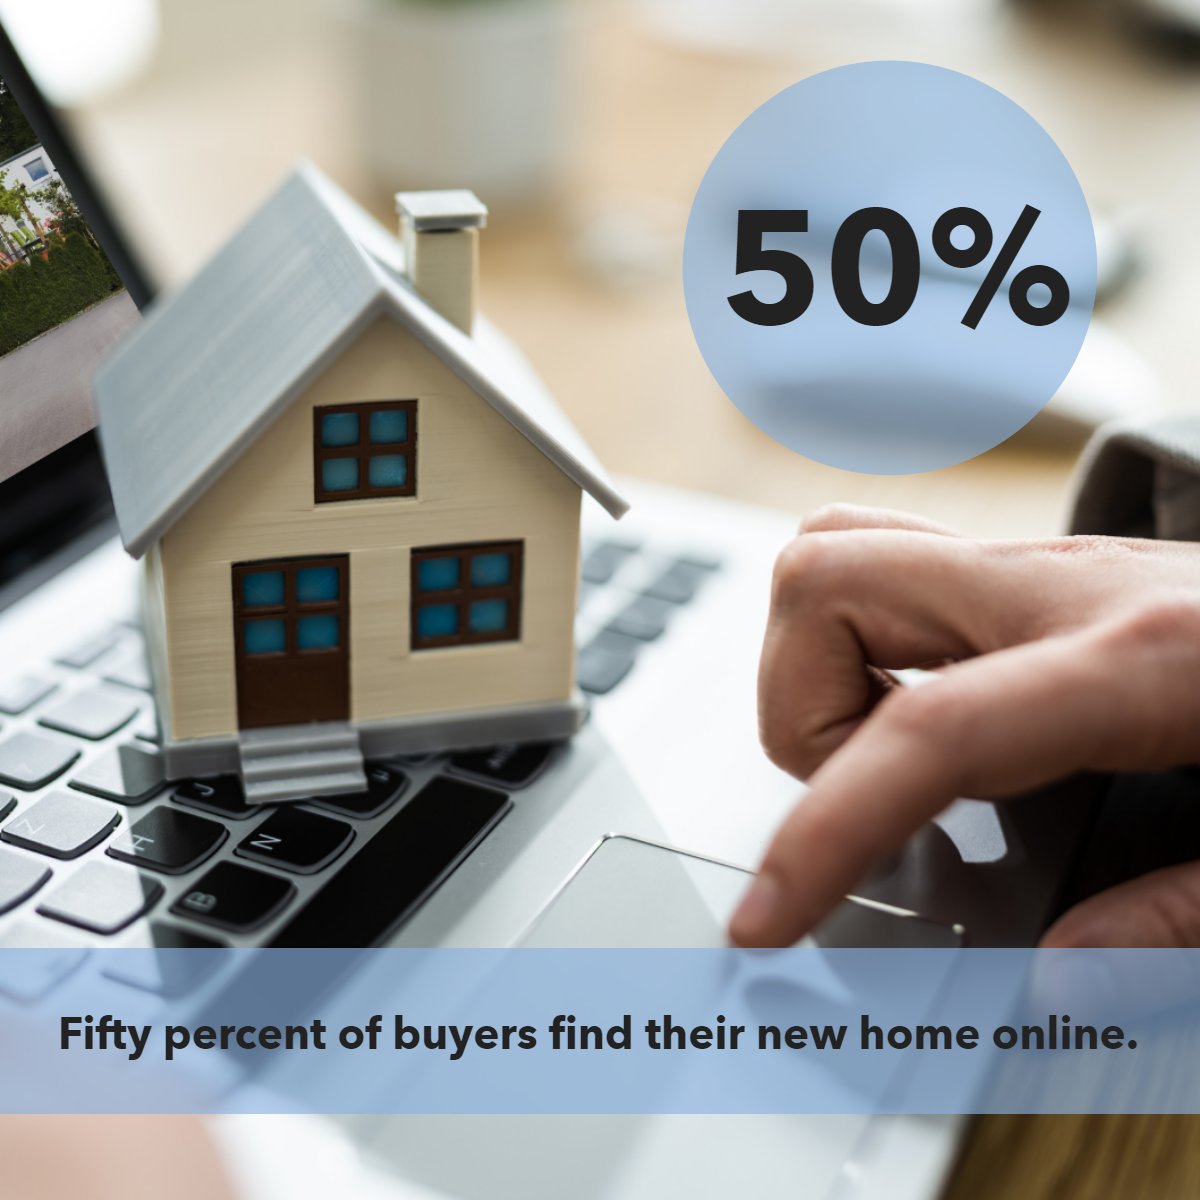 And I am pretty sure this number will only go up in the future! 📈

#funfacts #online #buyers #buyingonline #homesearch #househunting
 #forsale #buyahouse #mortgageinformation #hicksville #westbury